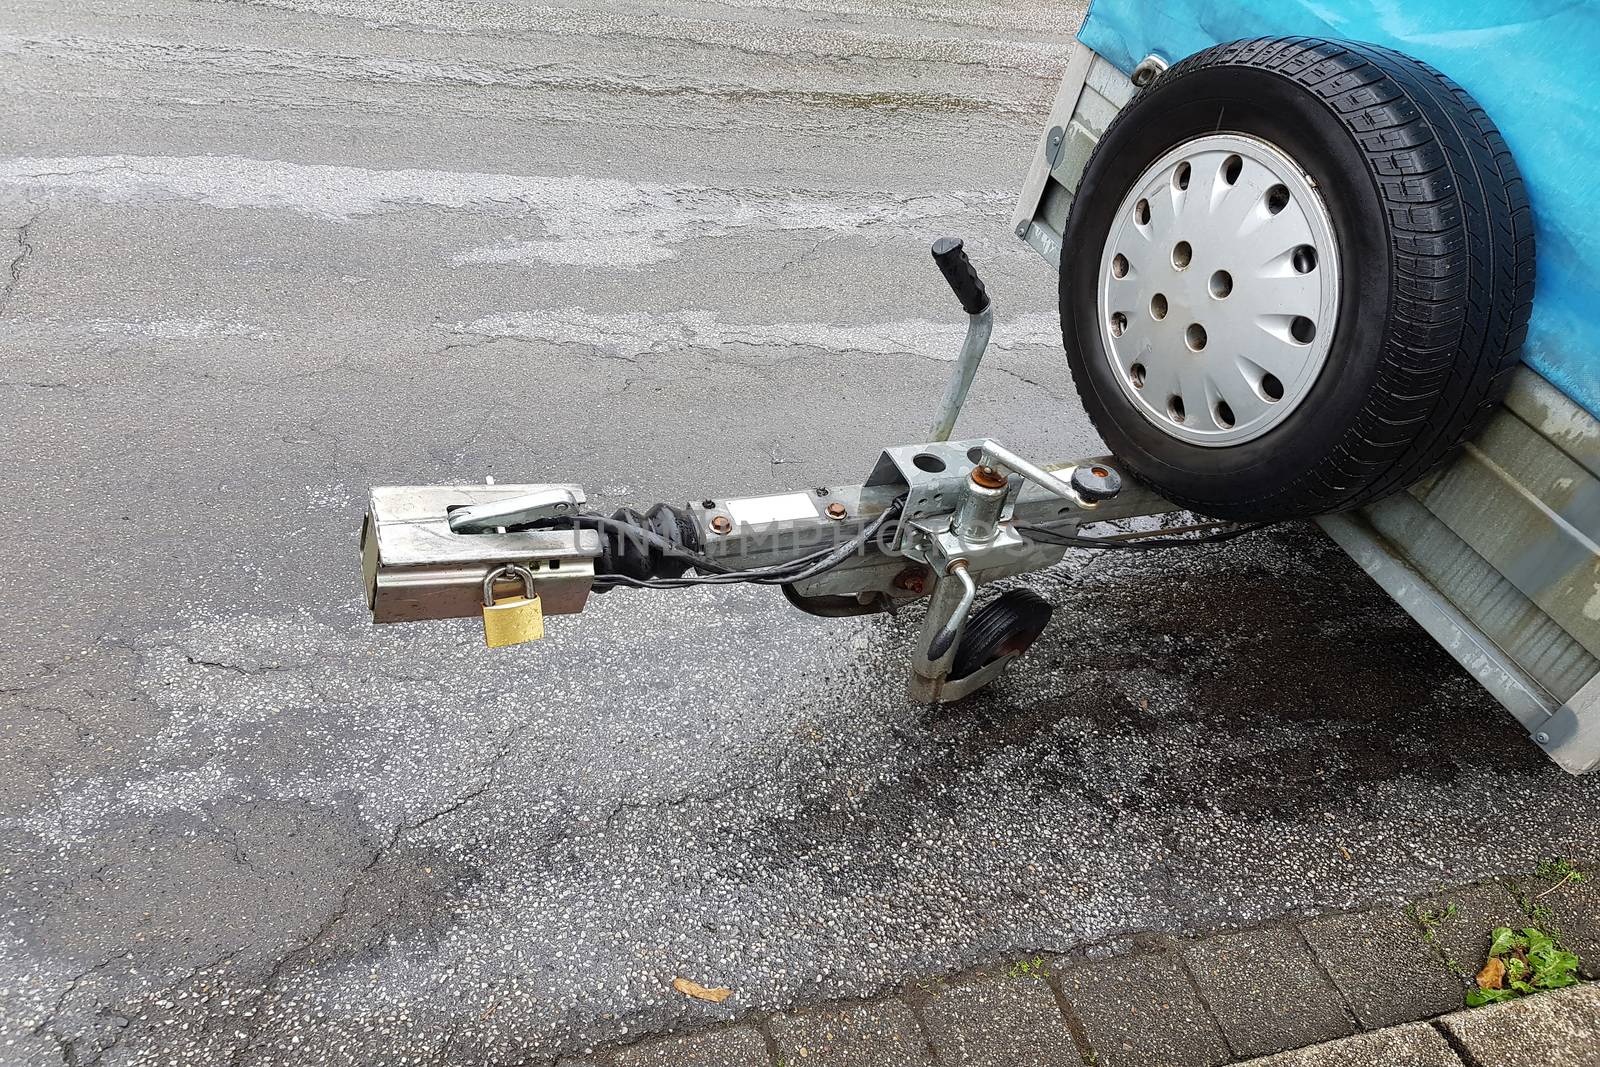 Towbar and jockey wheel with power connection and trailer lock in case of rain.